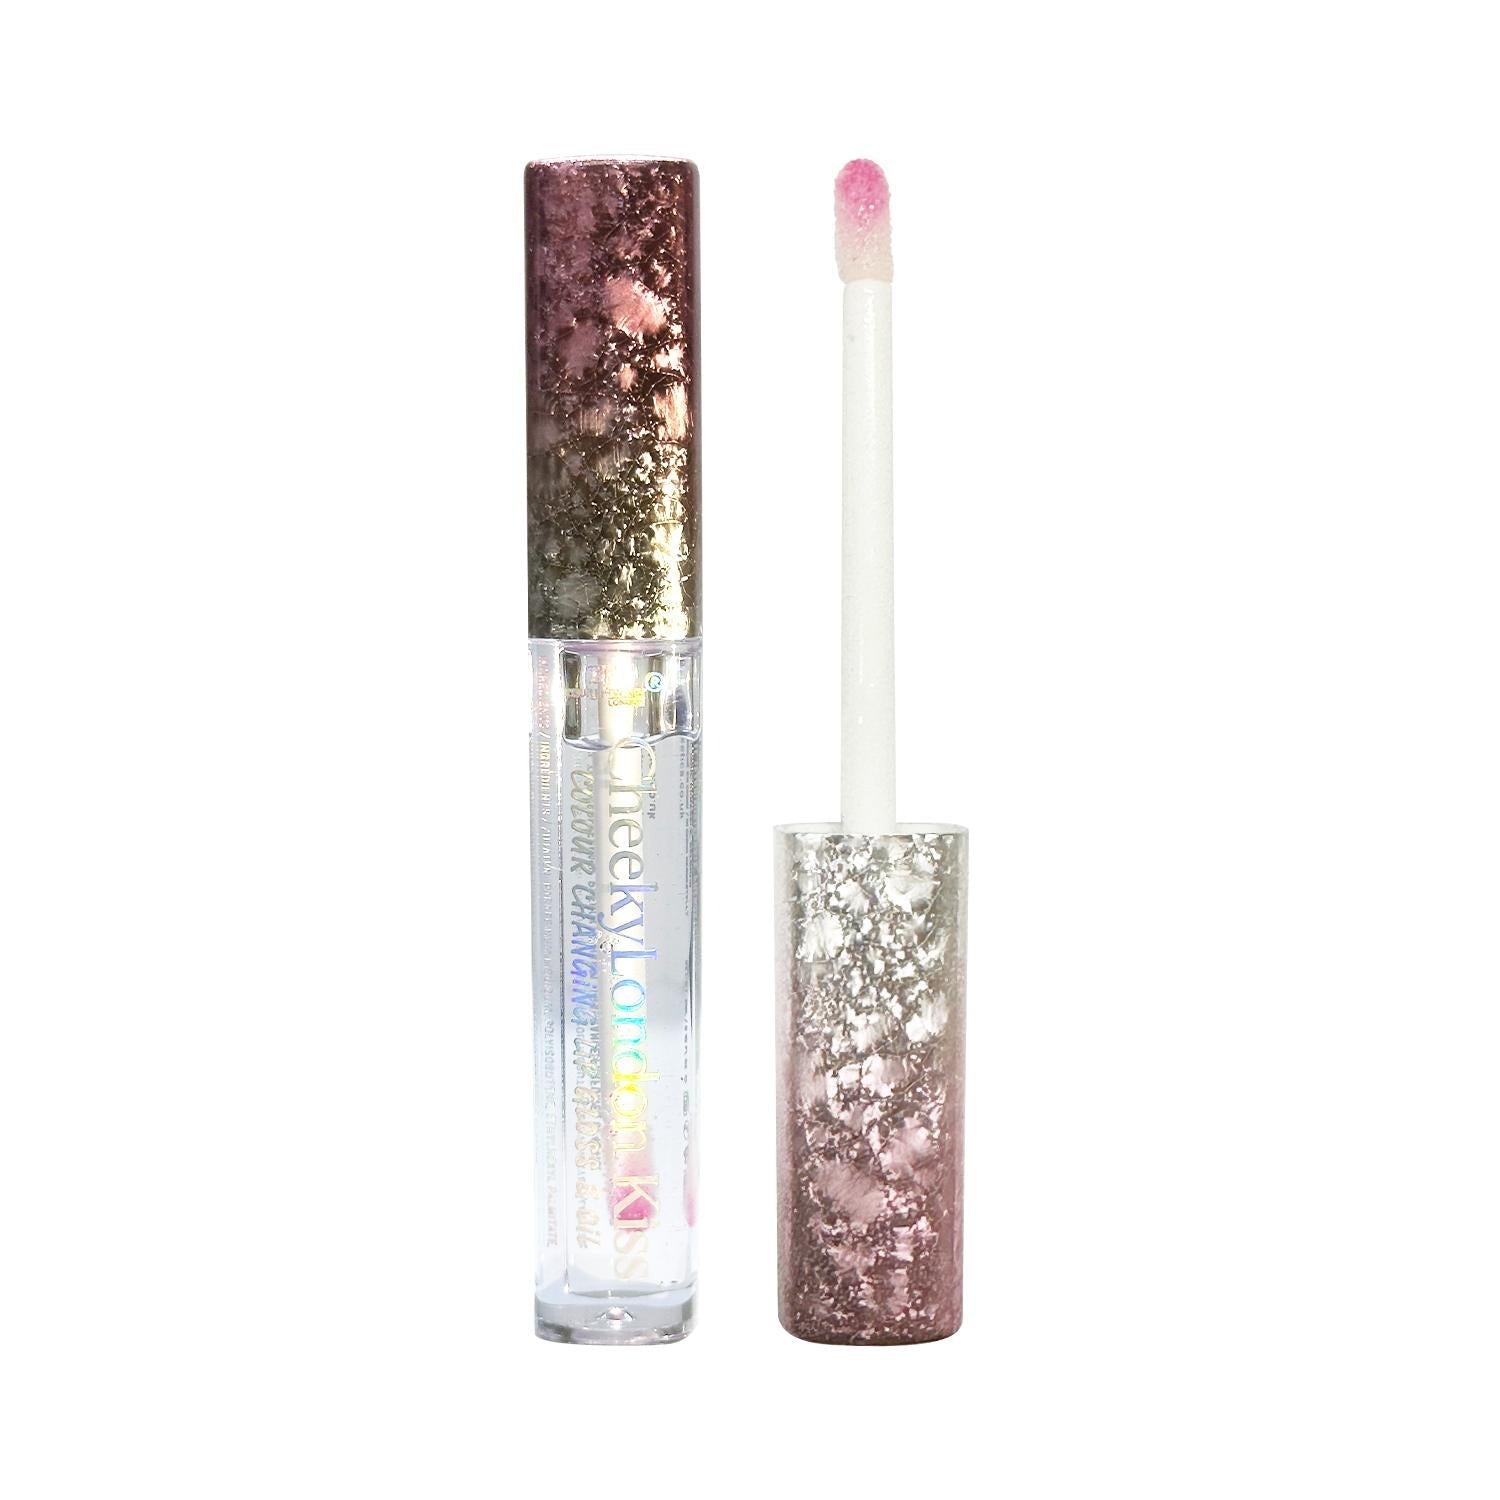 Cheeky London Kiss Colour Changing Lip Gloss & Oil - Beauty Forever London